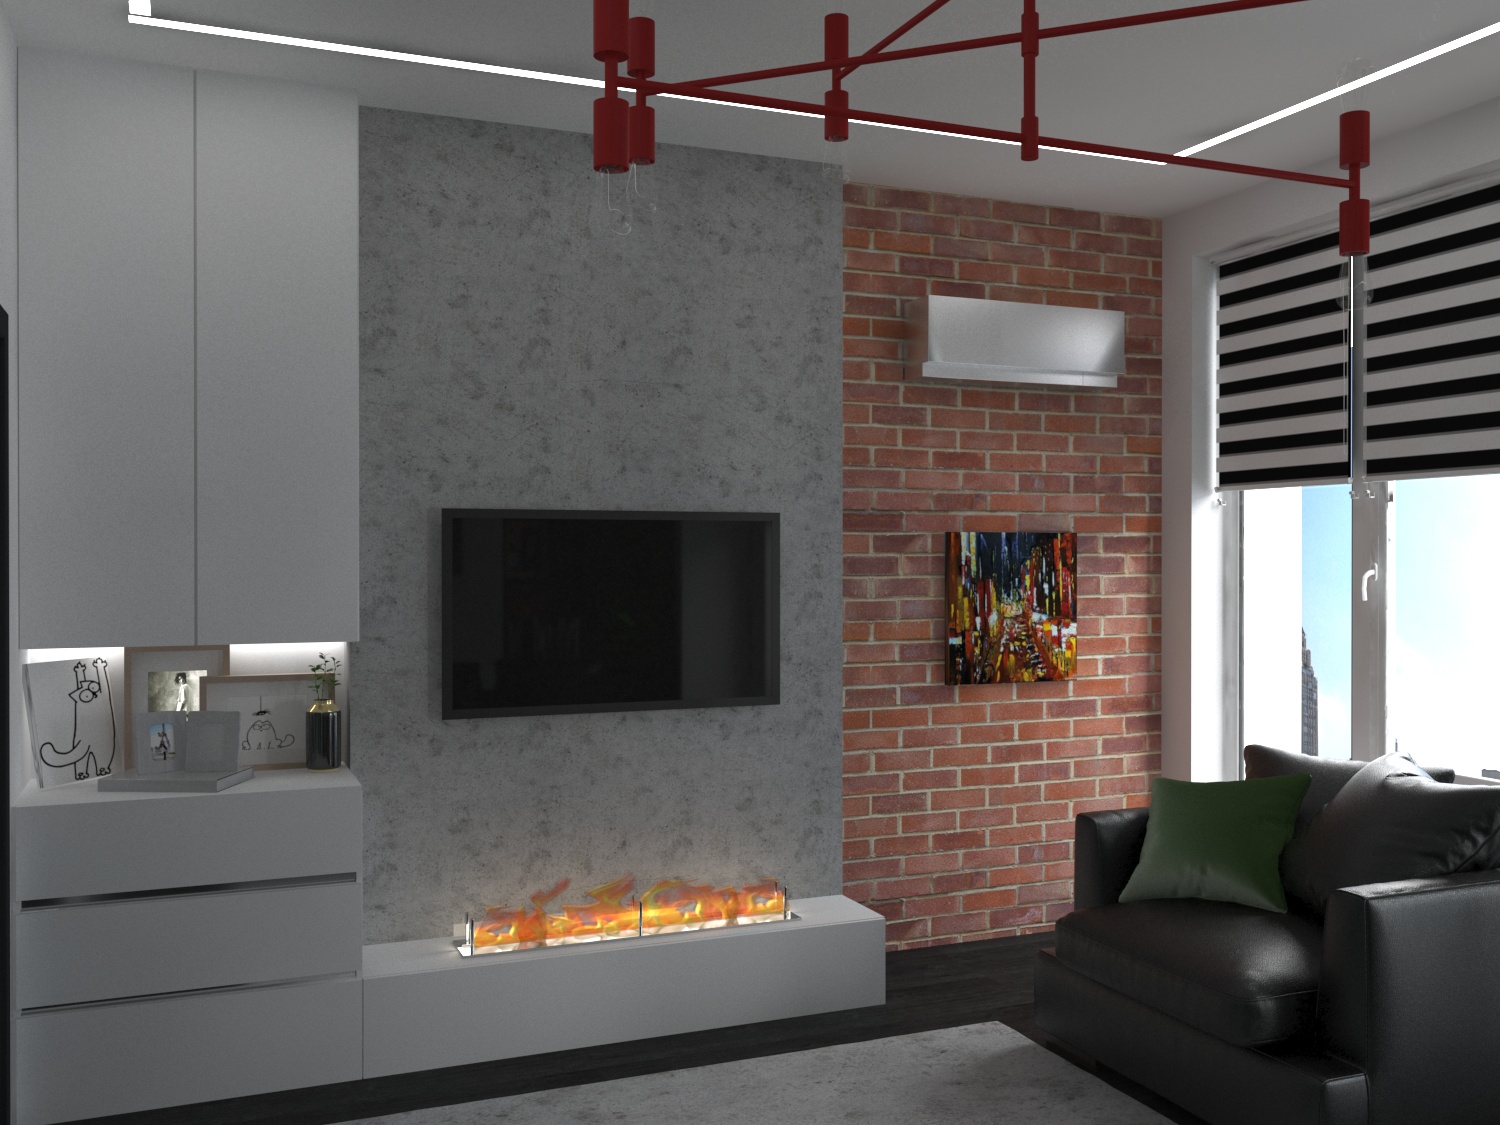 Loft for a young guy in 3d max vray 3.0 image